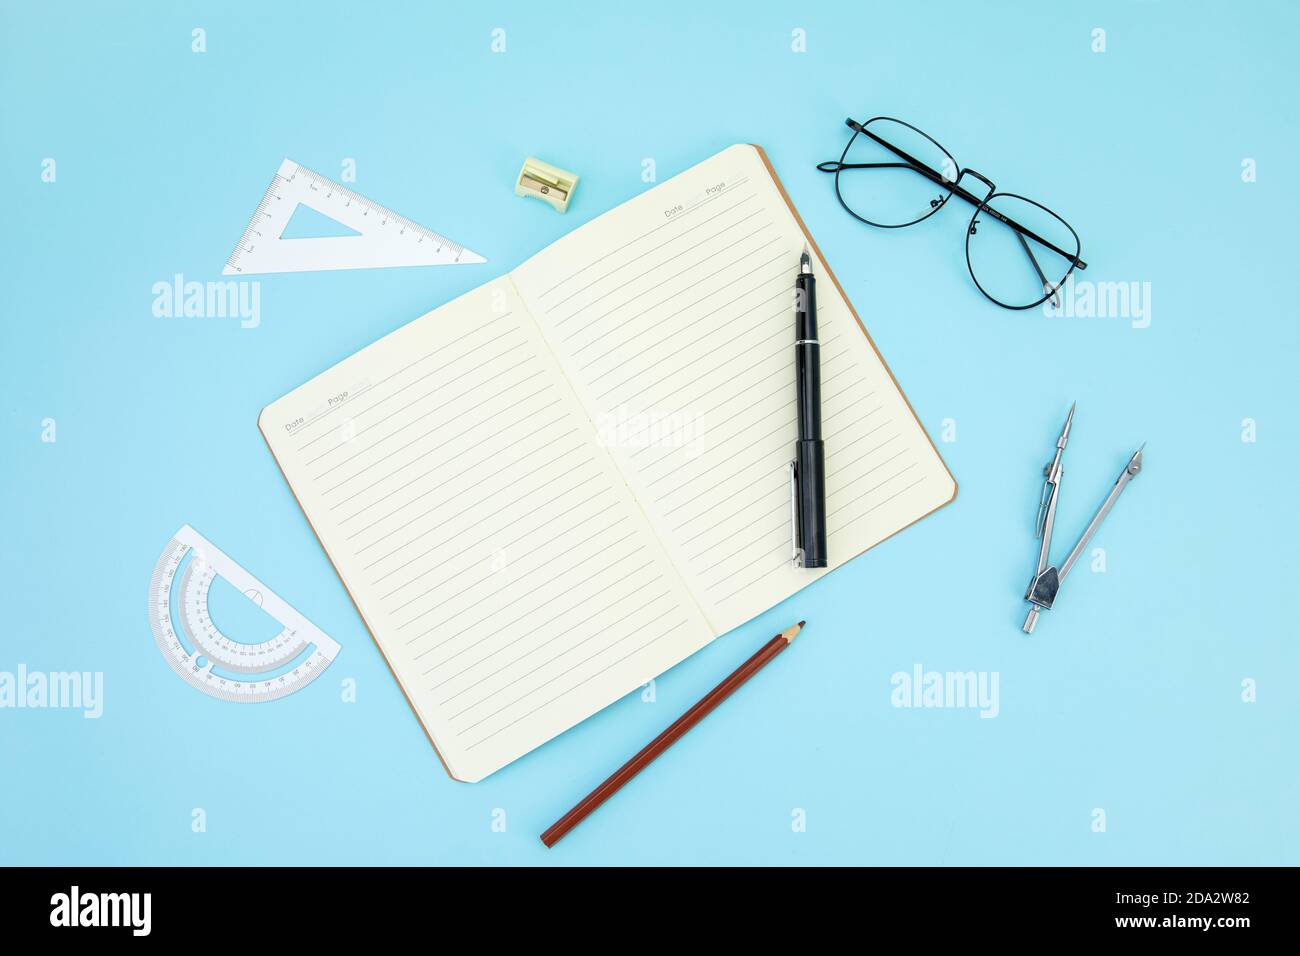 Open notebook, ballpen, pencil, sharpener, rulers, and eyeglasses isolated on a blue surface Stock Photo